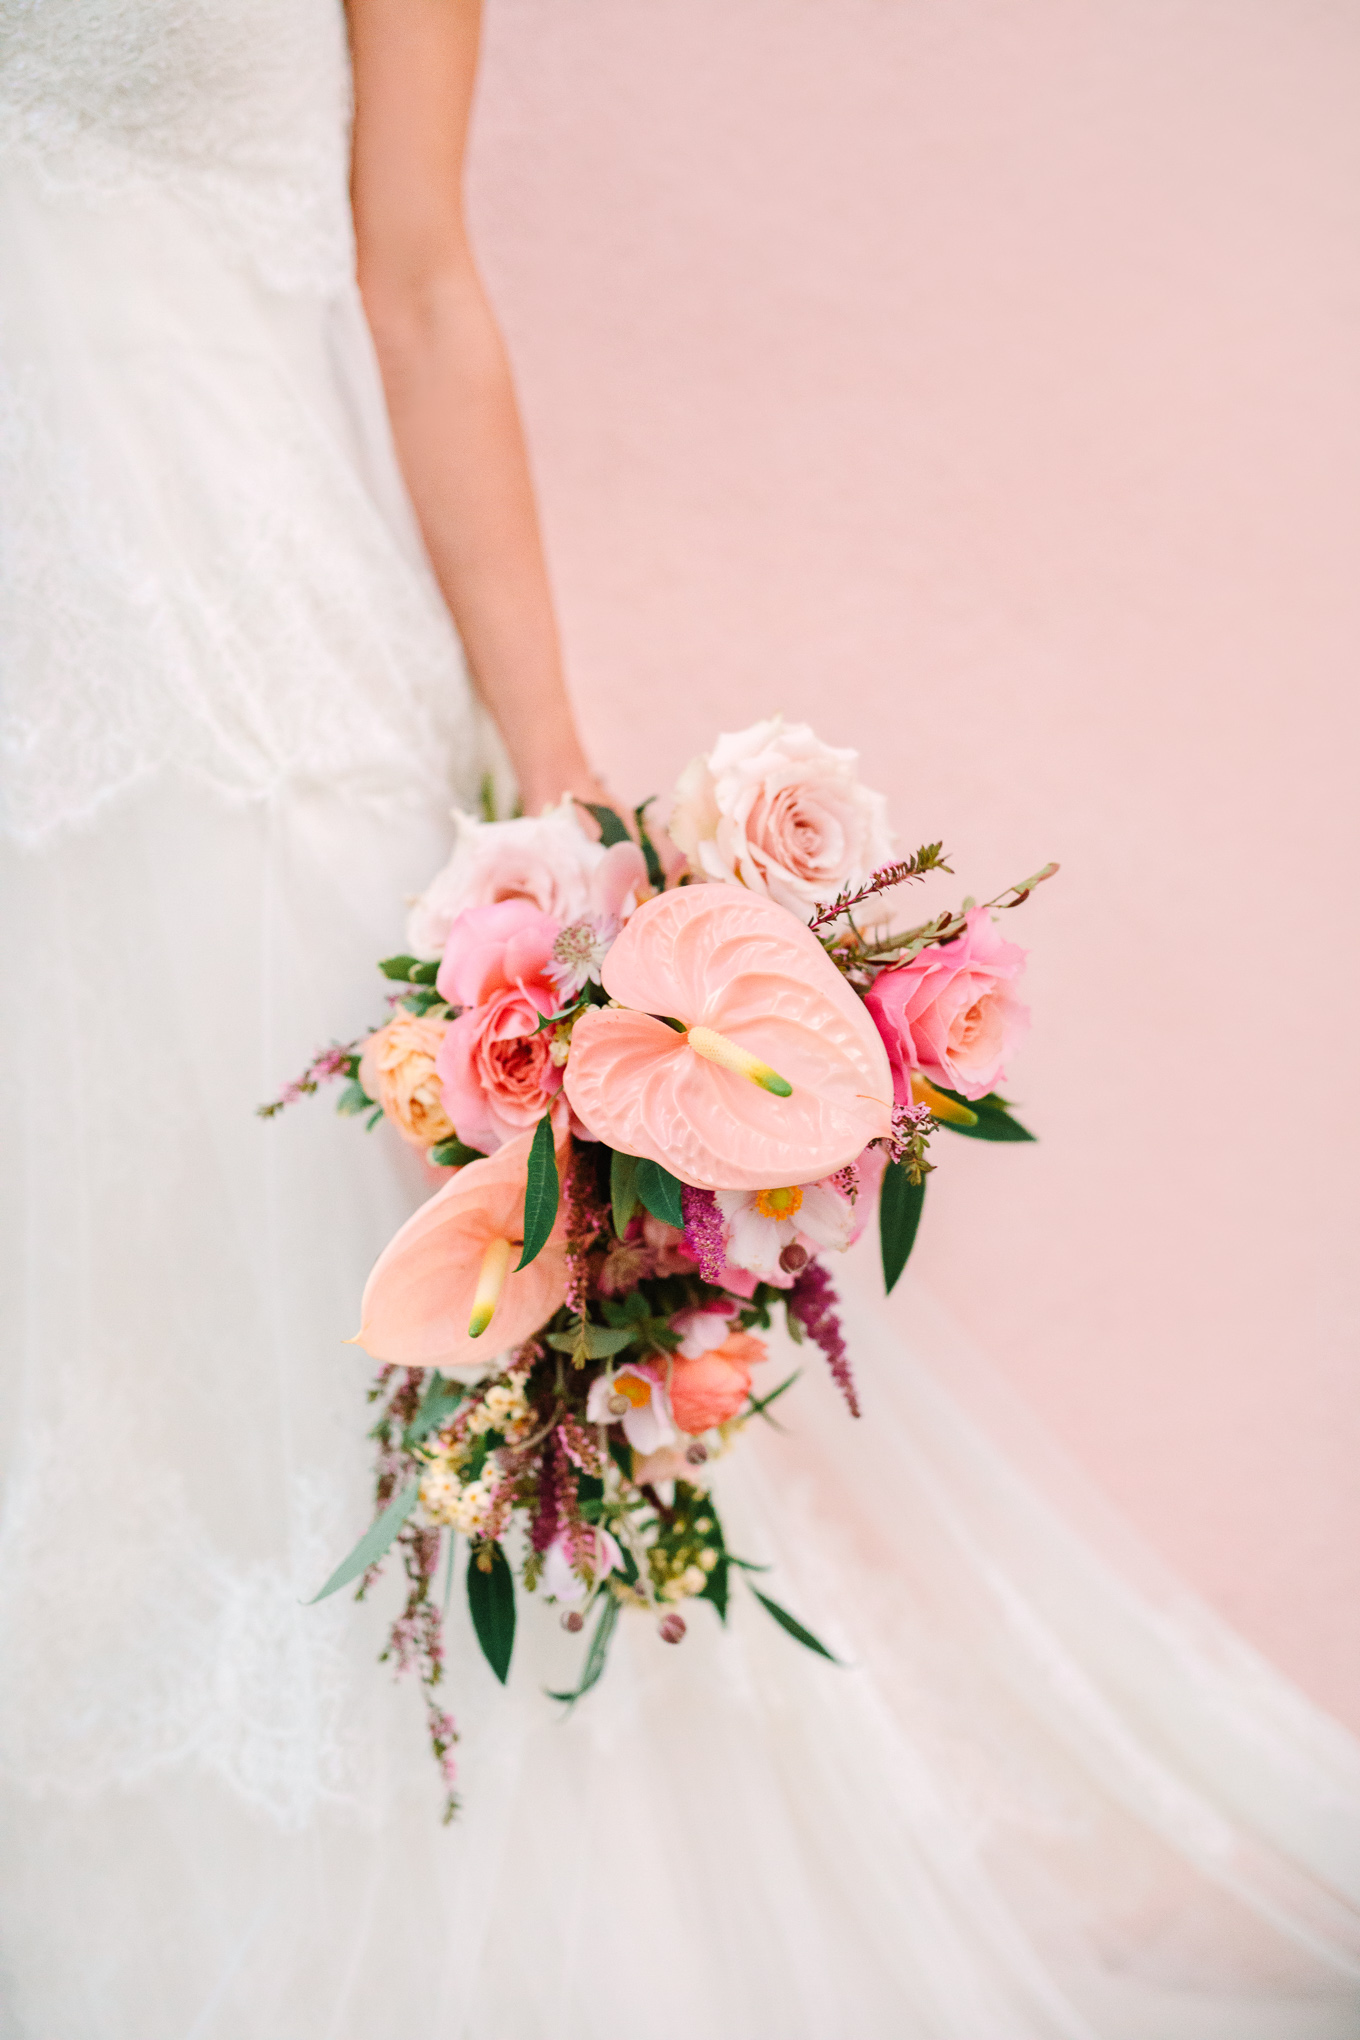 Tropical pink wedding bouquet | Beautiful bridal bouquet inspiration and advice | Colorful and elevated wedding photography for fun-loving couples in Southern California | #weddingflowers #weddingbouquet #bridebouquet #bouquetideas #uniquebouquet   Source: Mary Costa Photography | Los Angeles